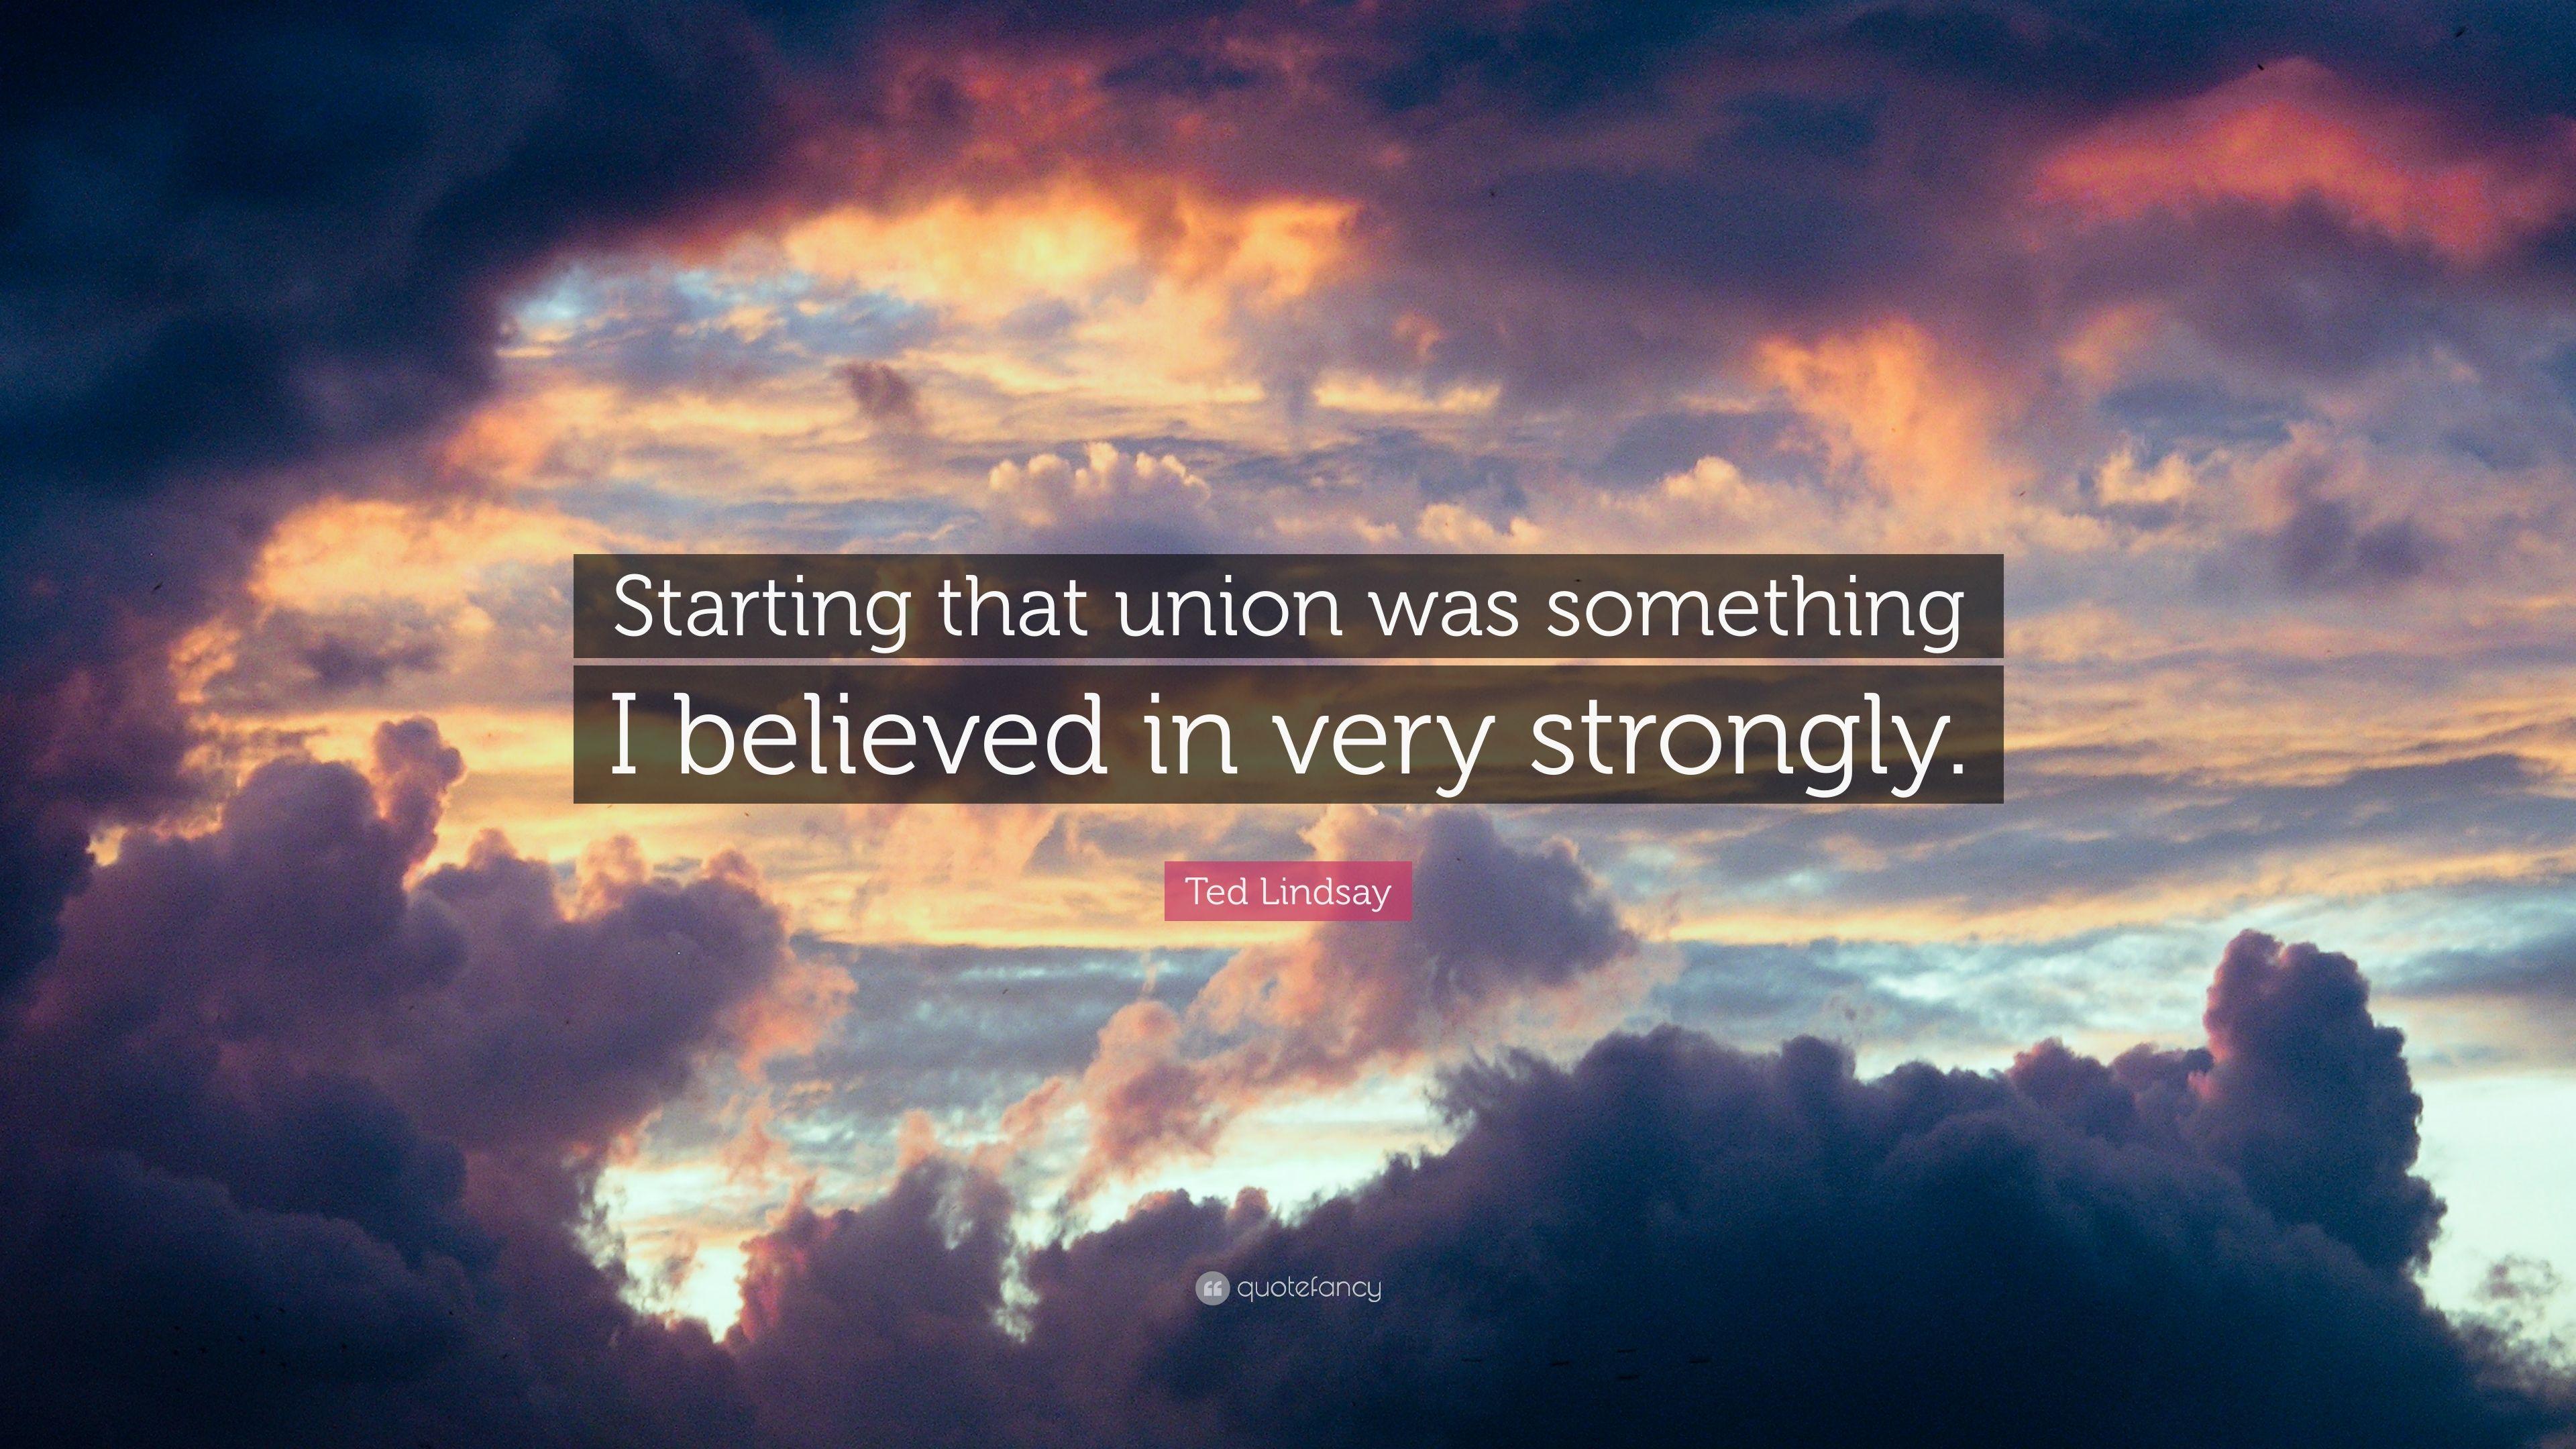 Ted Lindsay Quote: “Starting that union was something I believed